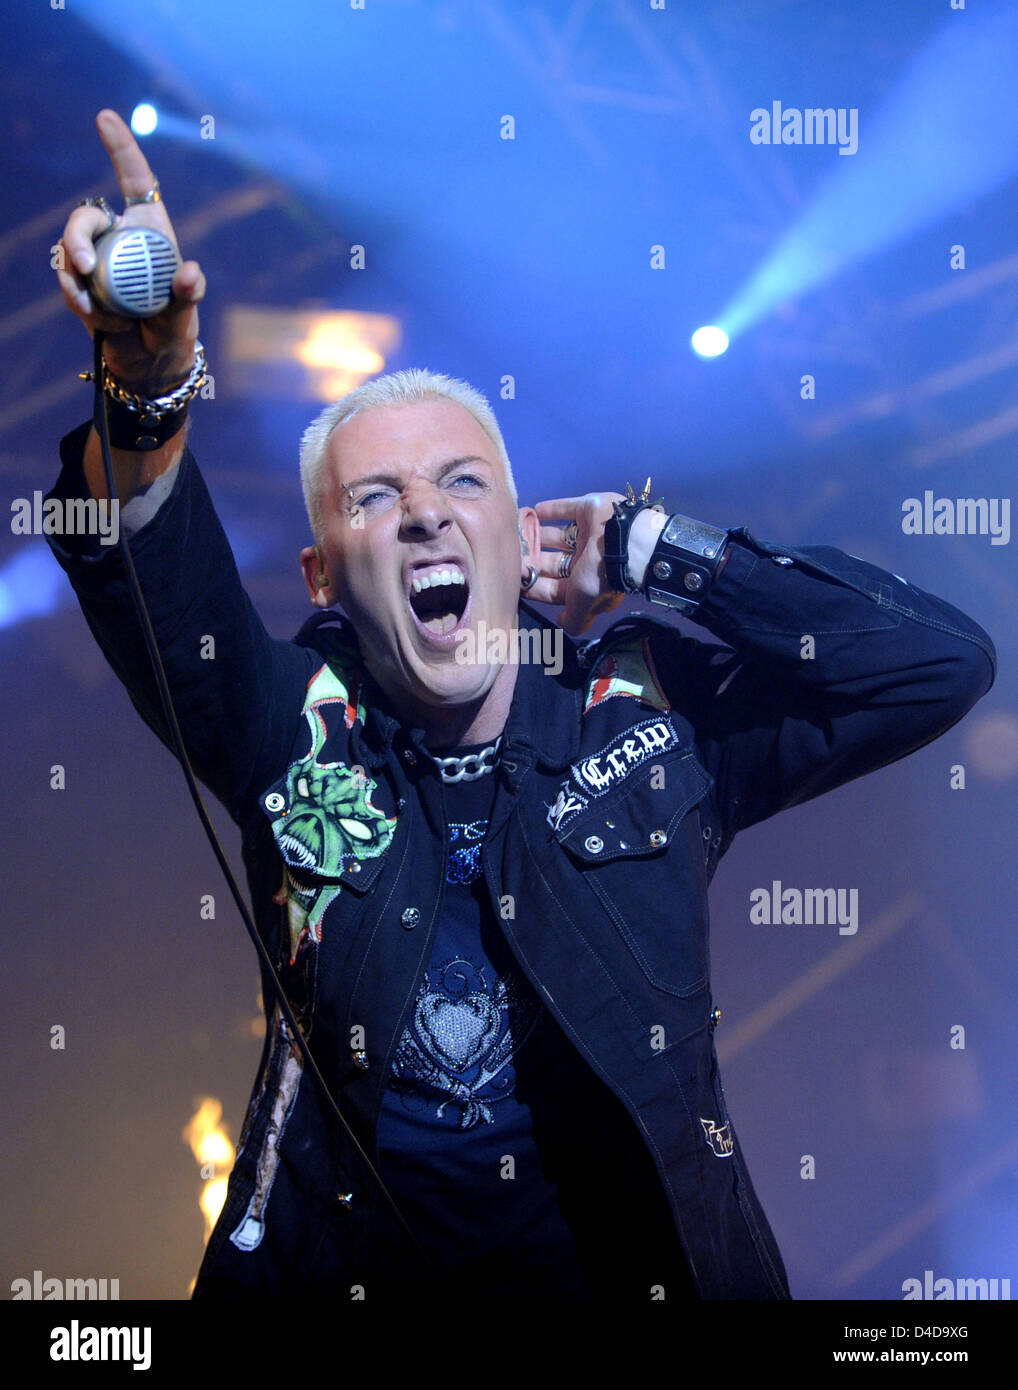 H.P. Baxxter, frontman of the German techno band Scooter, performs at the concert at Columbiahalle in Berlin, Germany, 06 April 2008. In 2007, Scooter had their 20th ten hit in